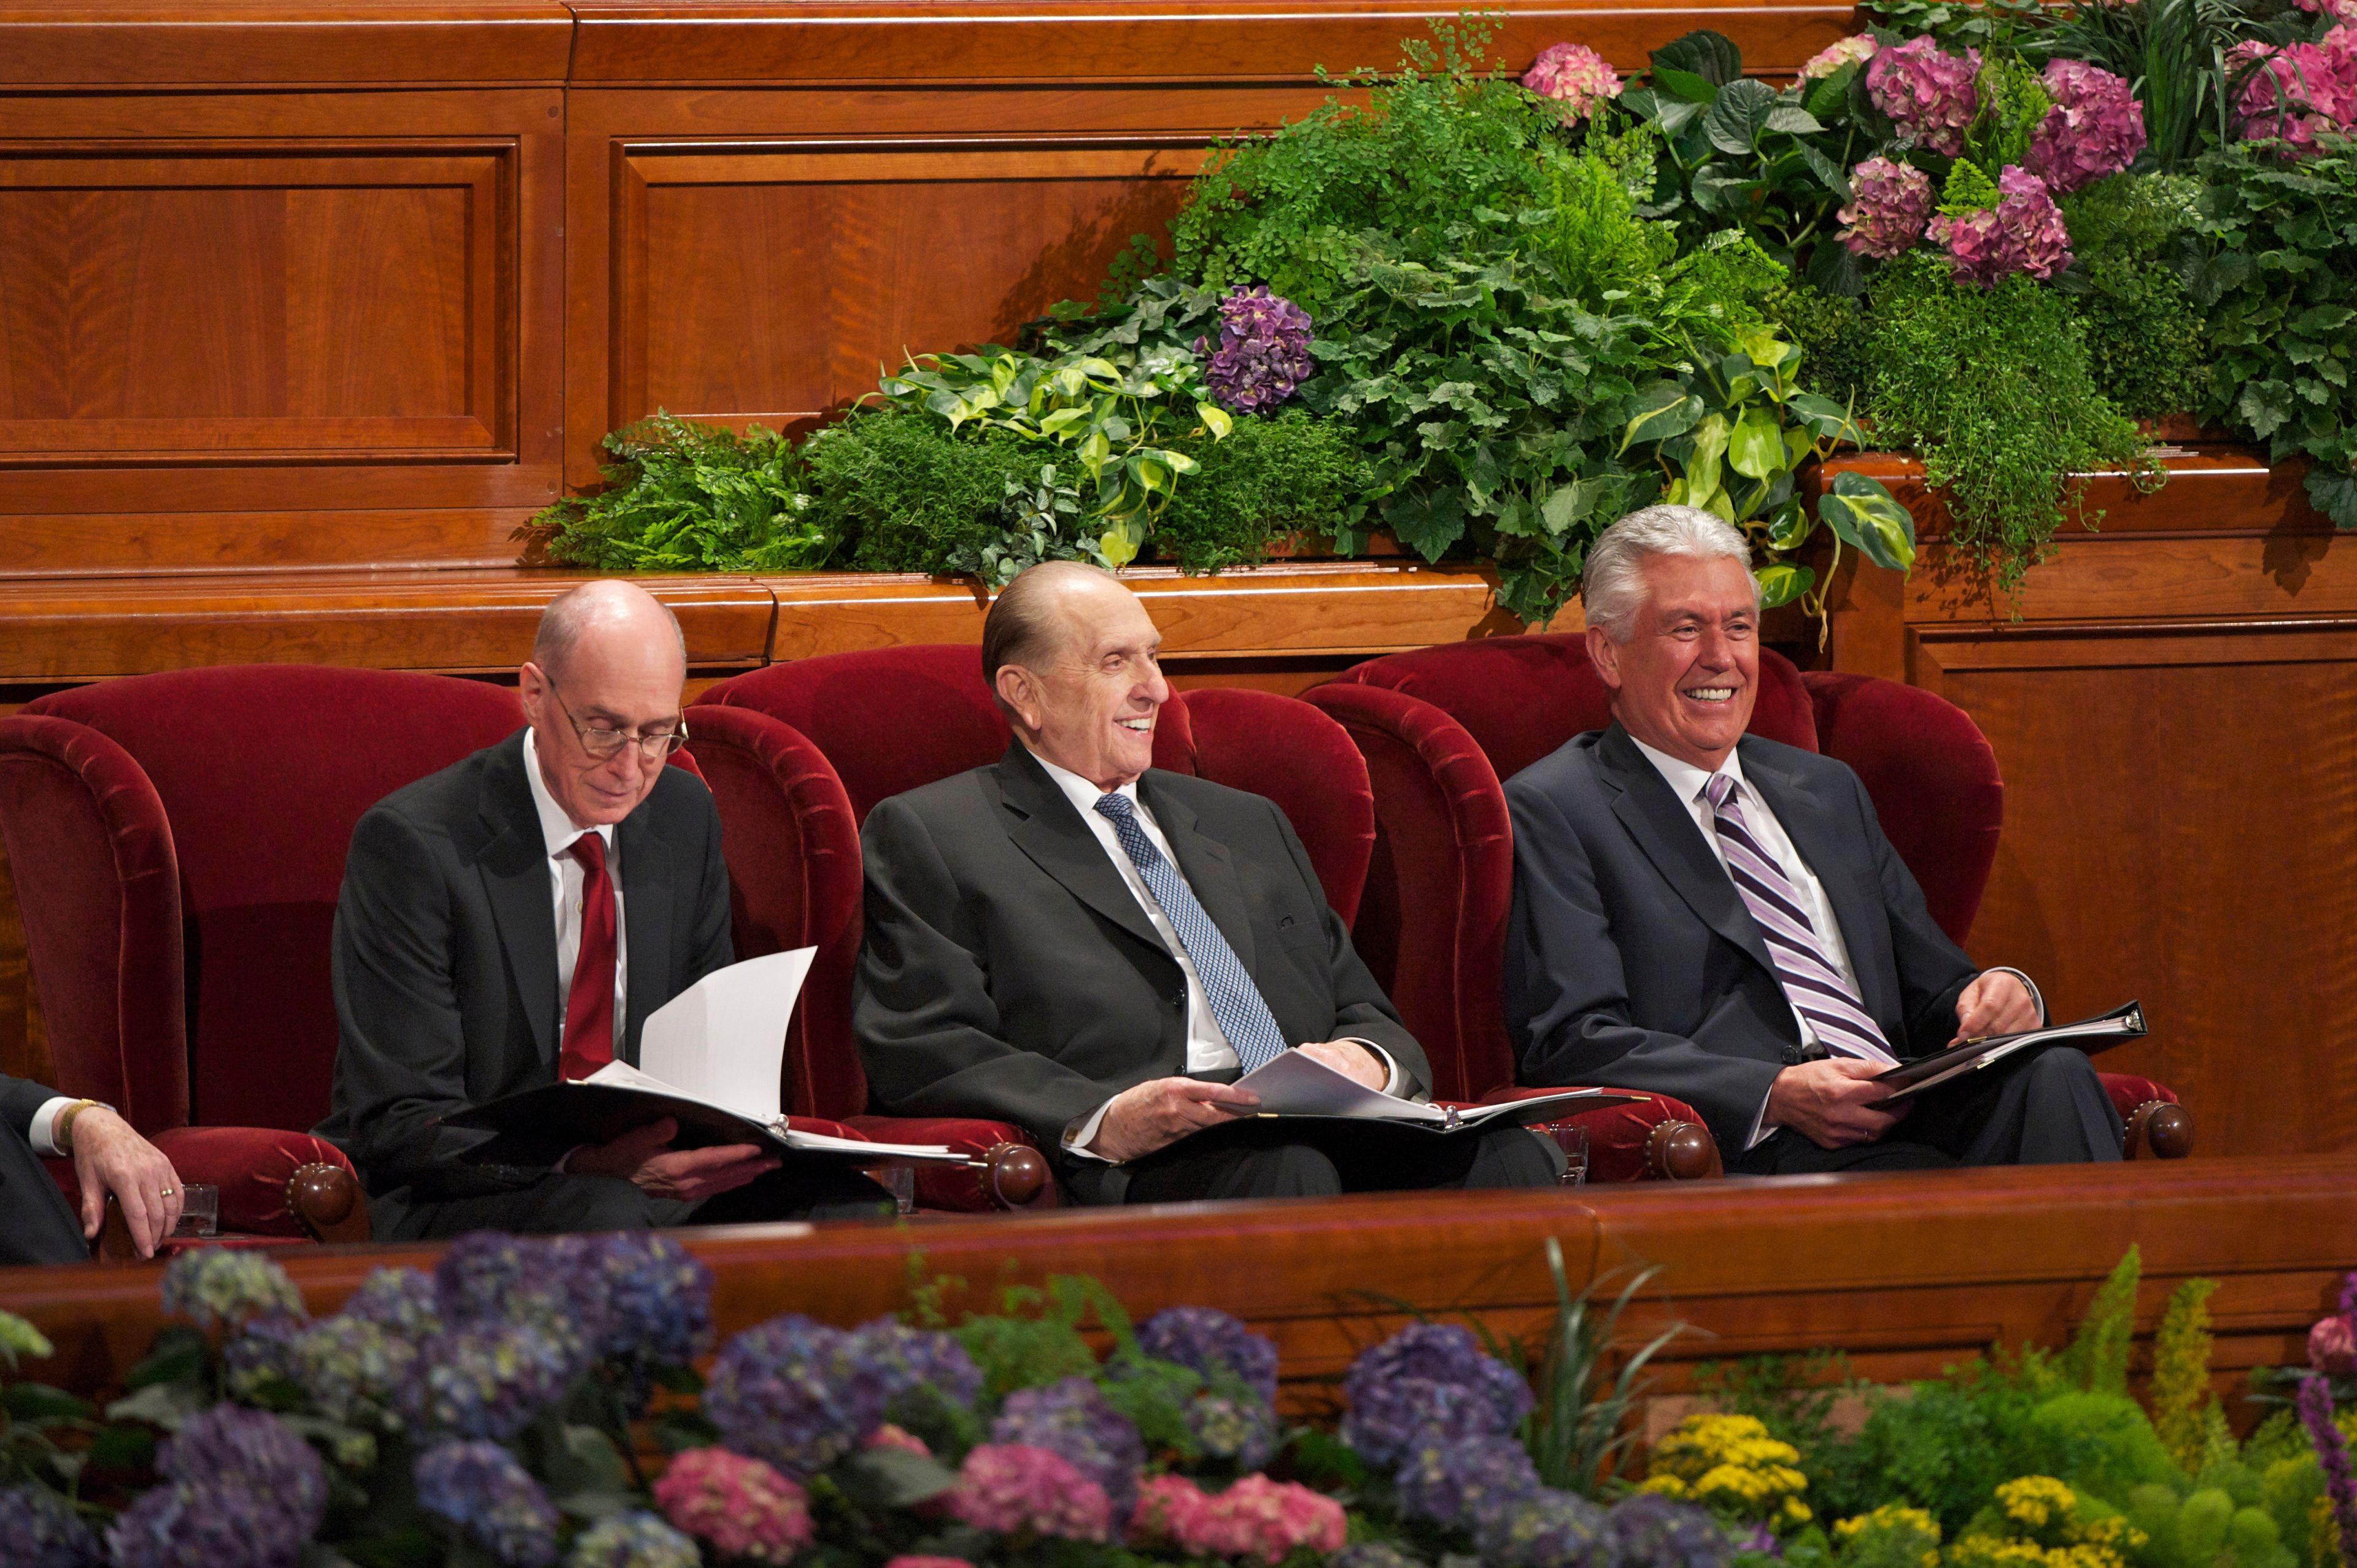 Thomas S. Monson, Dieter F. Uchtdorf, and Henry B. Eyring smiling and sitting in armchairs during general conference.